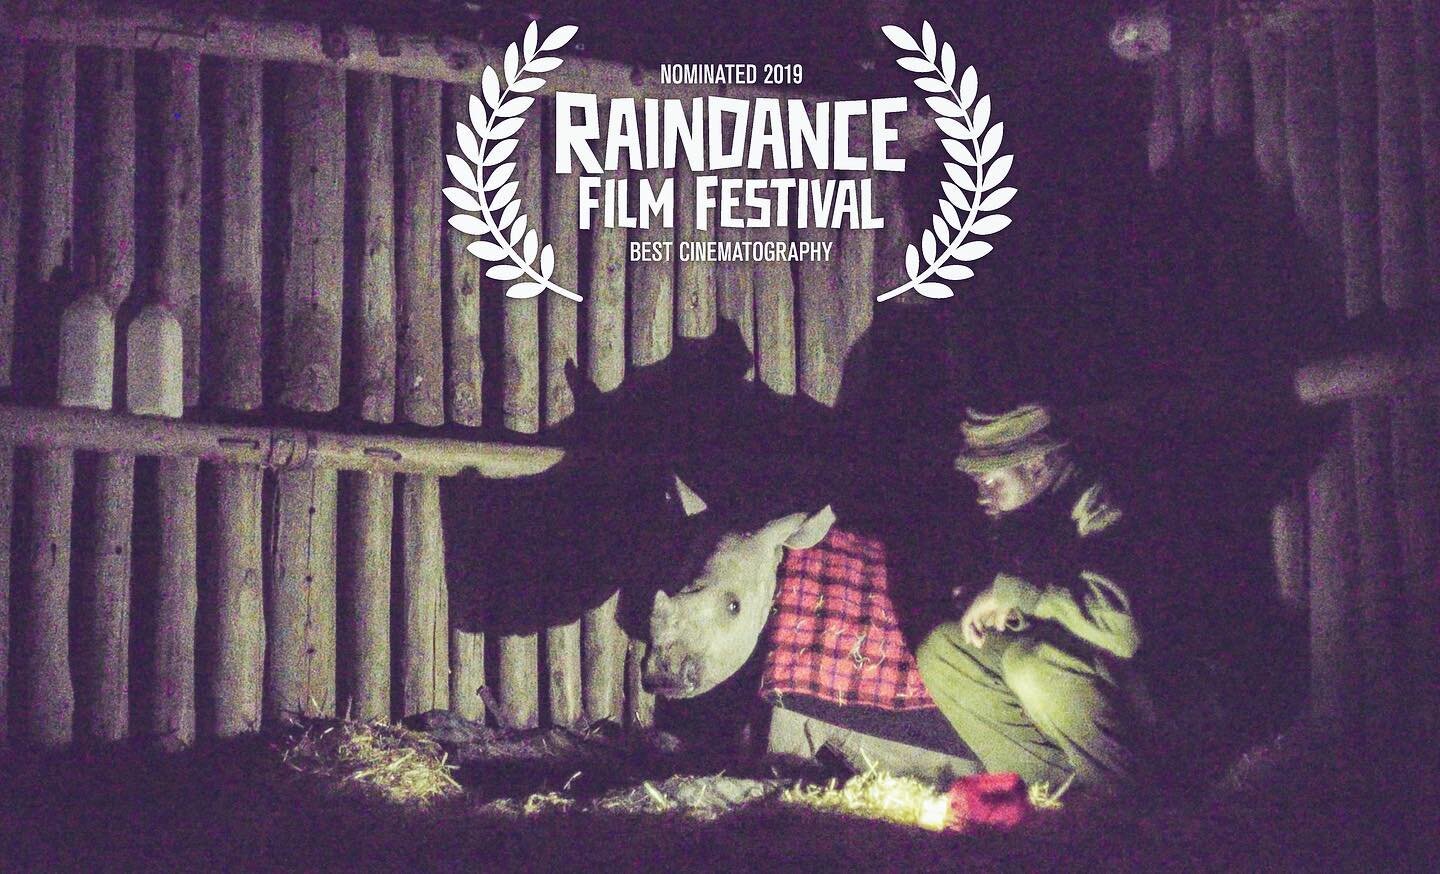 We&rsquo;re thrilled to be having our UK premiere at @raindancefilmfestival  late Sept, 2019. We were later notified that KIFARU has also been Nominated for Best Cinematography 🎥 Thank you to all #Raindance staff &amp; programming team. We look forw